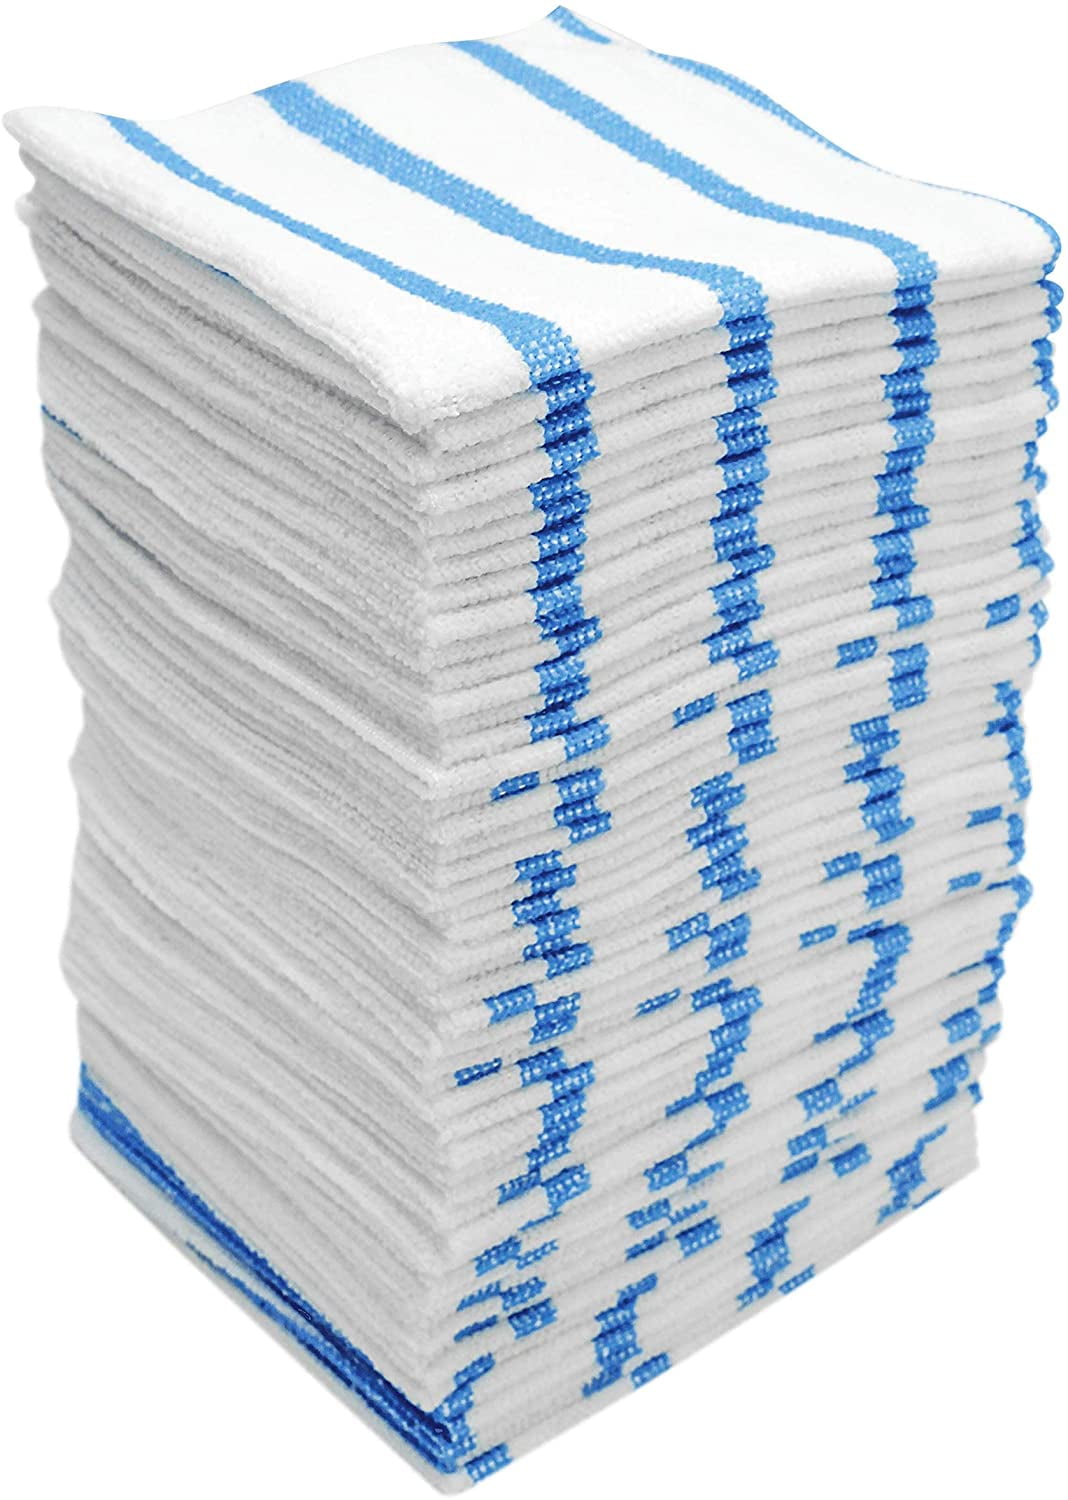 Details about   Bulk Edgeless Microfiber Cleaning Cloths White and Blue Stripe 50 Pack 